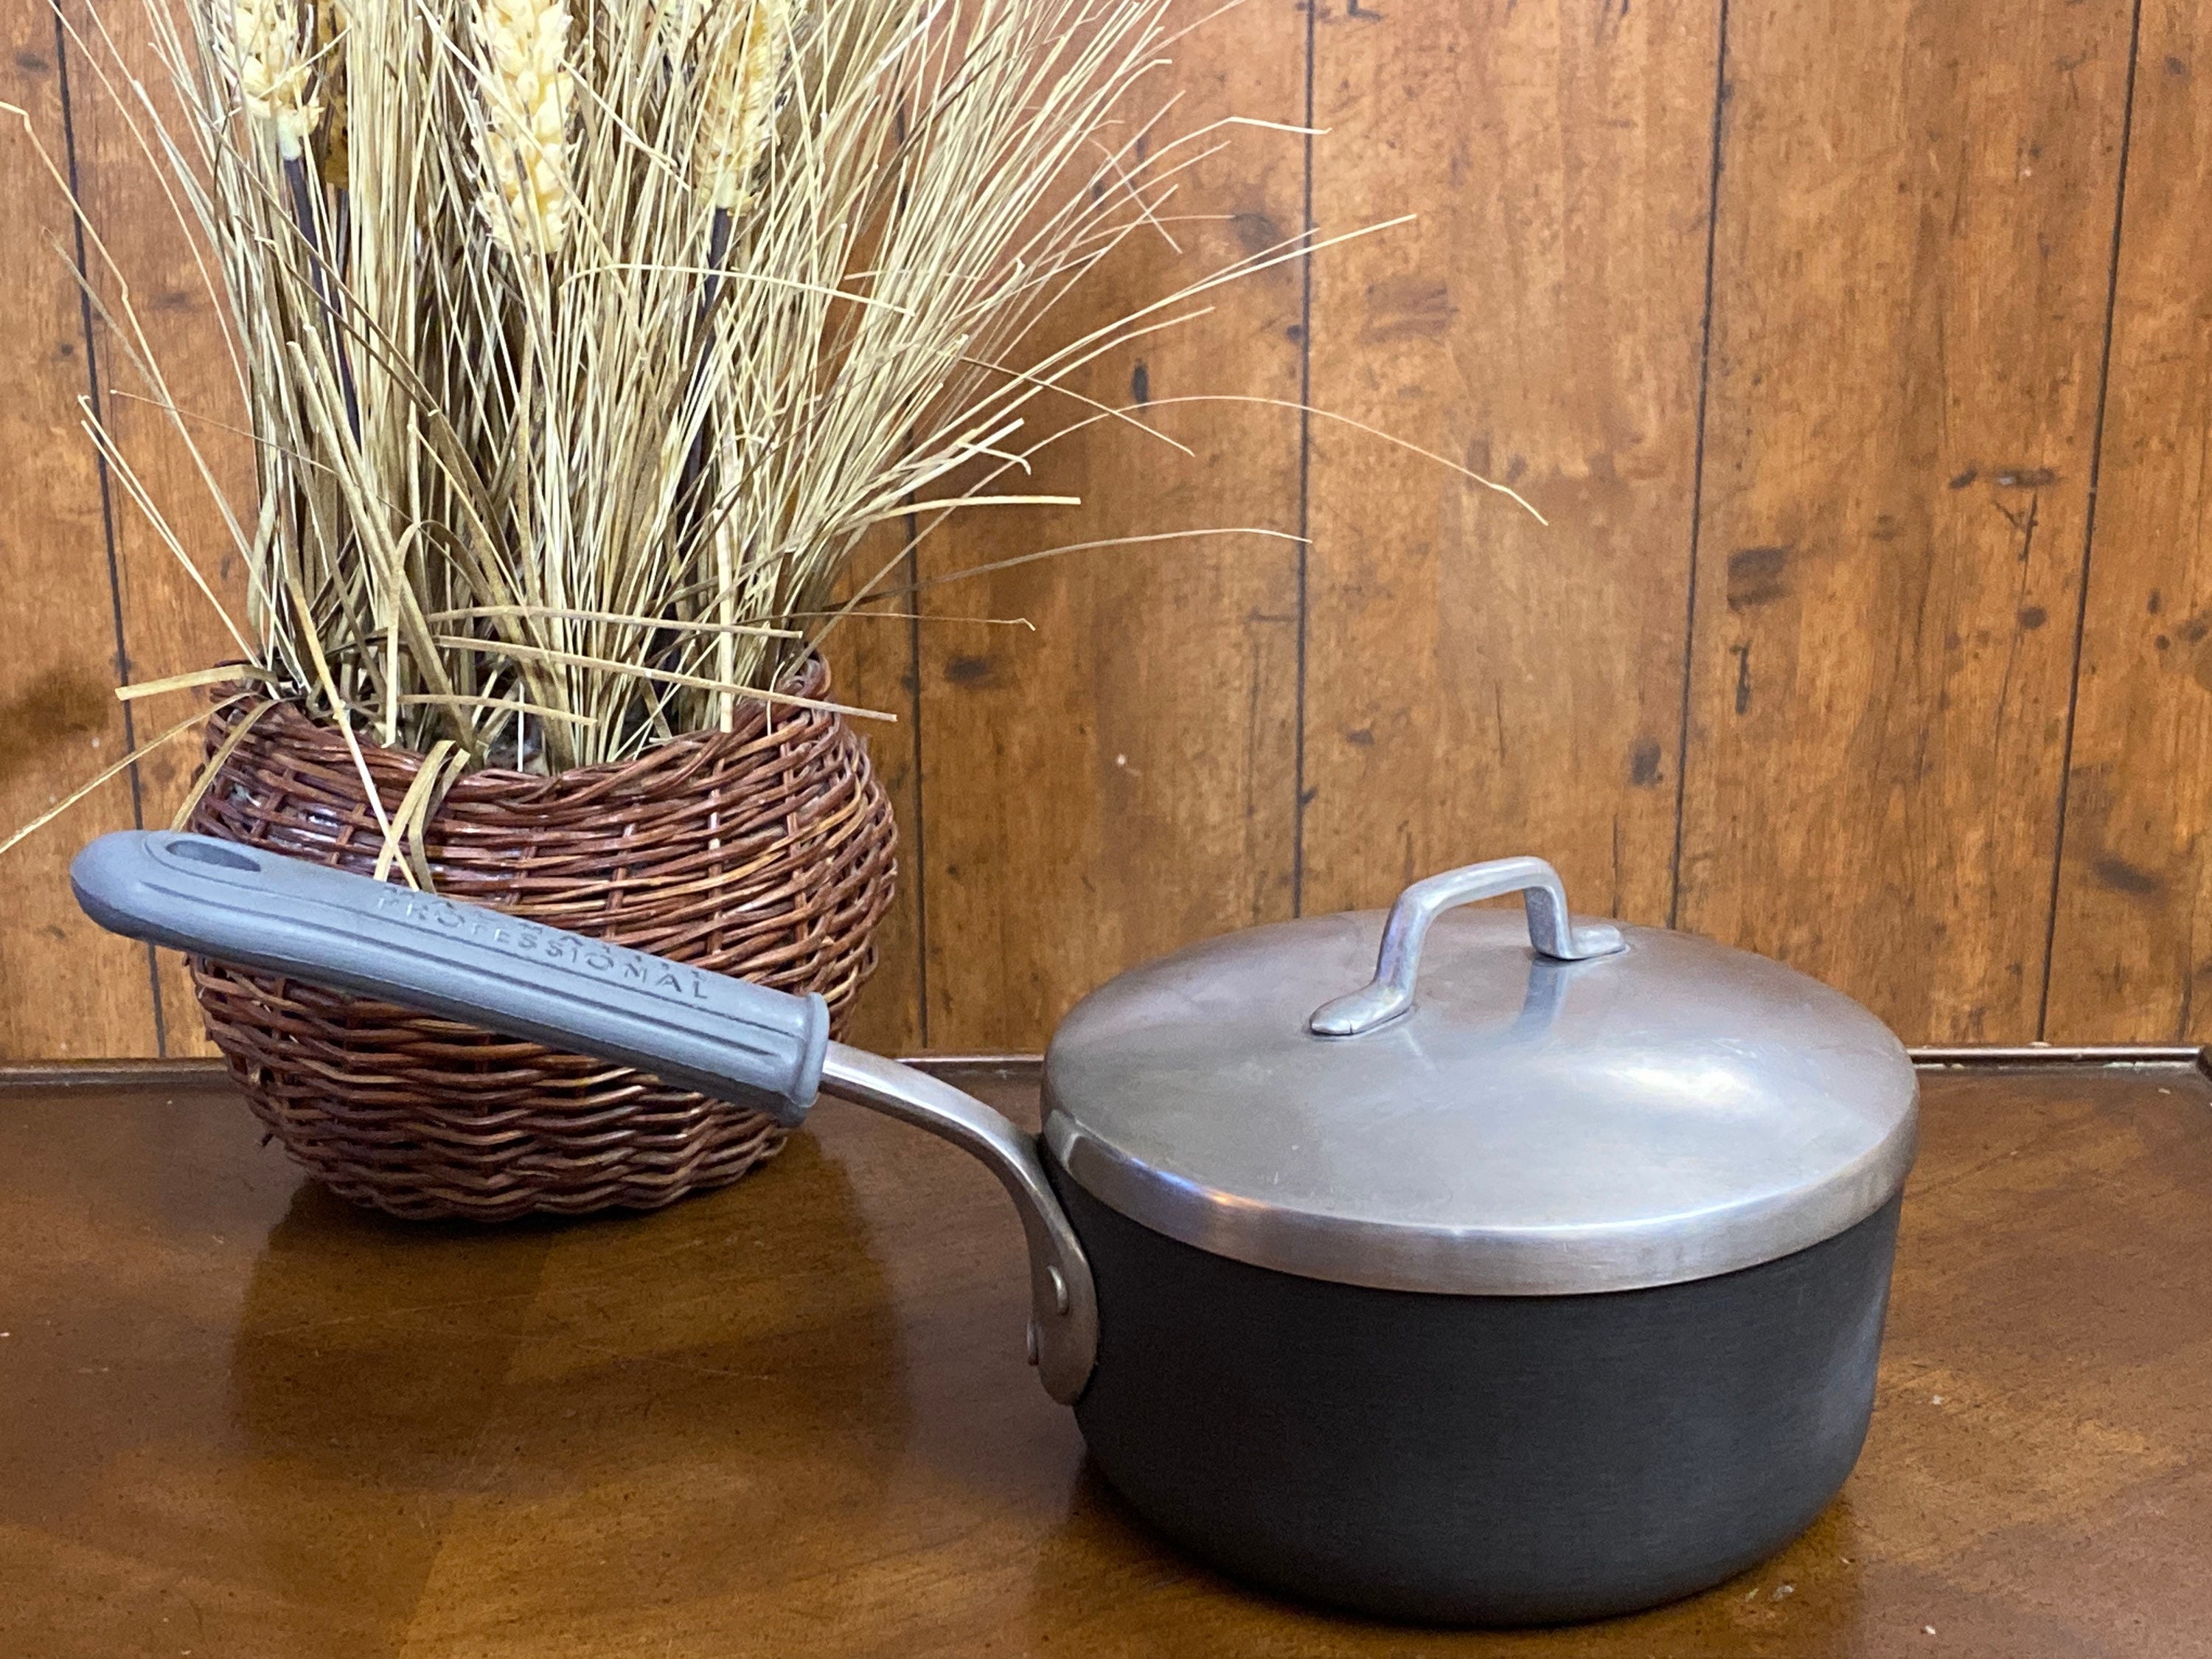 Magnalite Pro 1 Quart Saucepan With Lid by GHC Vintage General Household  Corp Magnalite Covered Pan Magnalite Saucepan Magpro Pan 